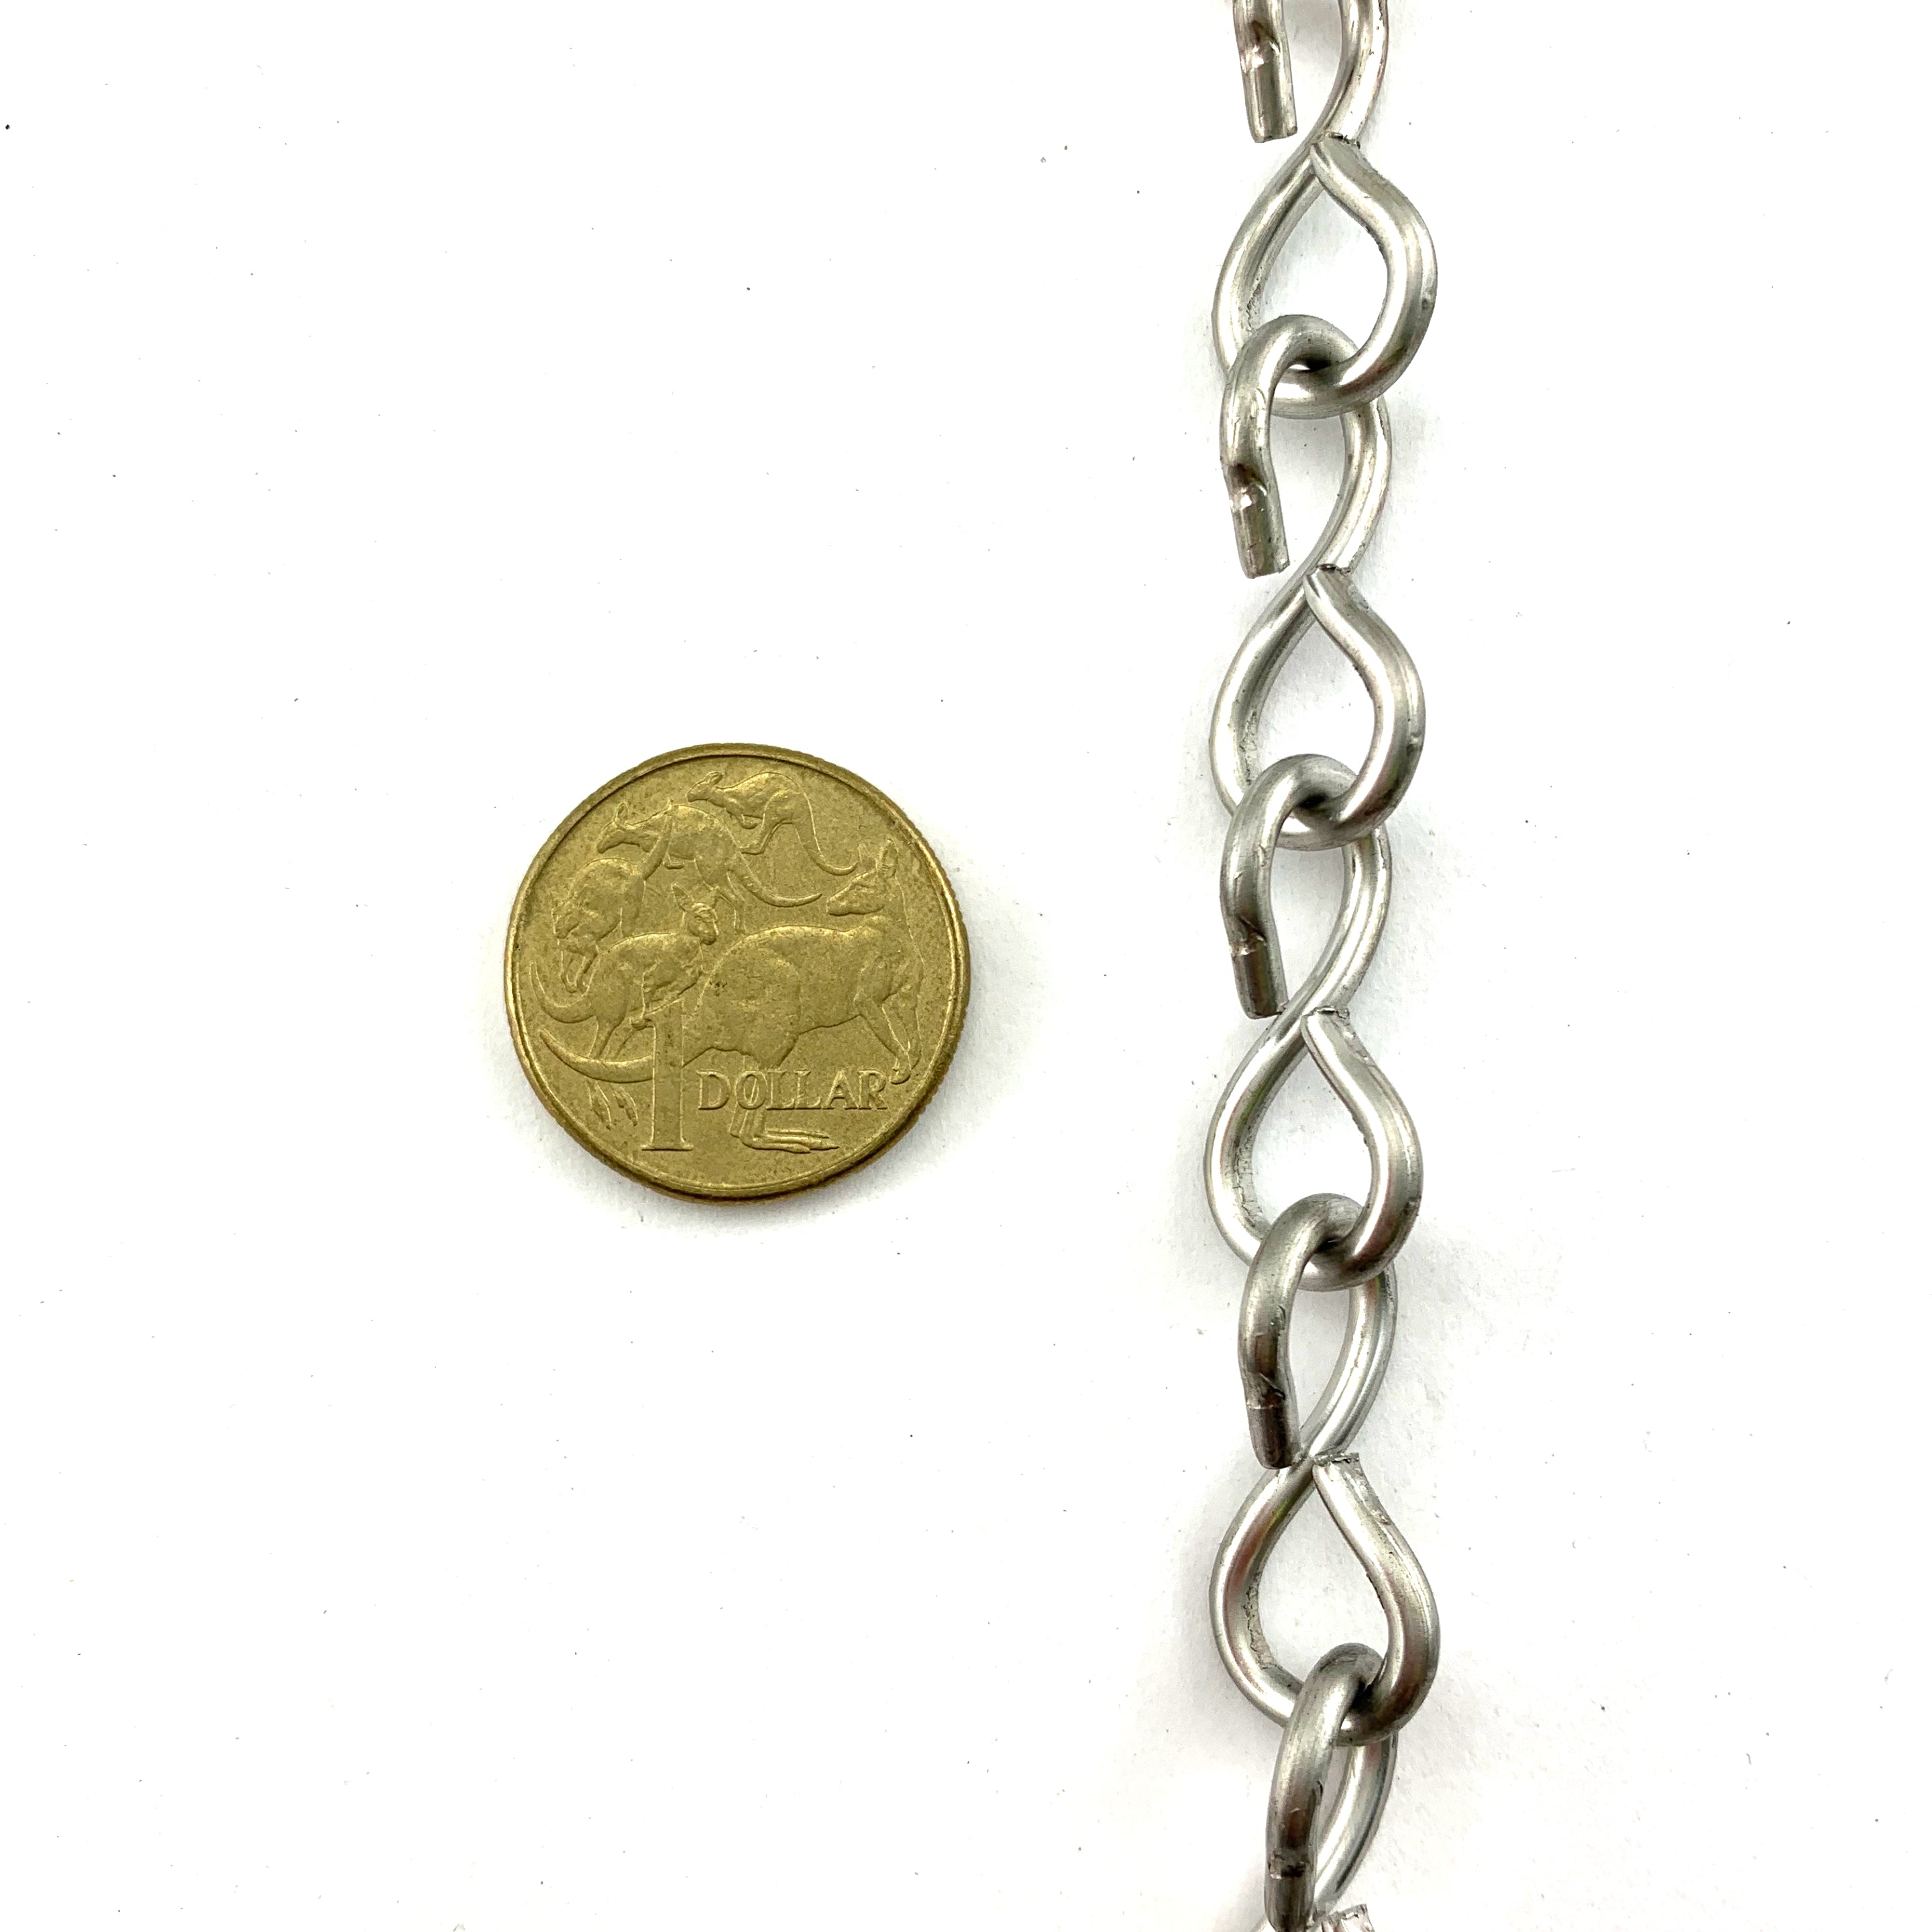 Australian made Single Jack Chain in marine grade stainless steel, size 2.5mm and quantity of 30 metres. Melbourne